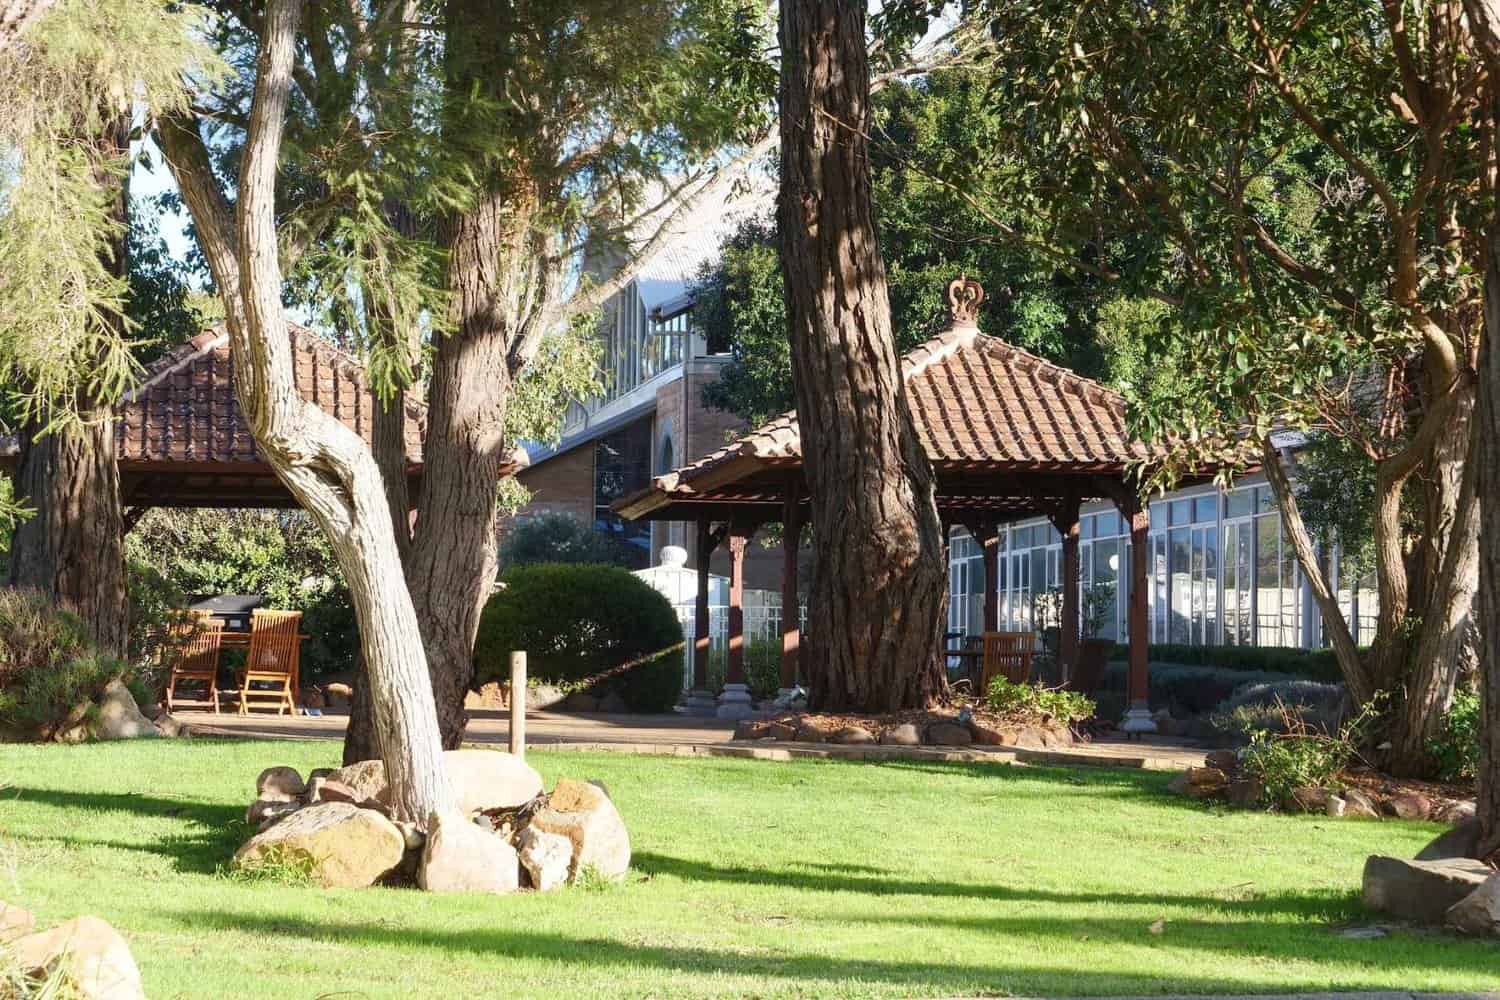 A welcoming hotel exterior featuring a lush lawn, trees, gazebos, and a BBQ area in the distance, providing a relaxing atmosphere for guests after making their hotel deposit.